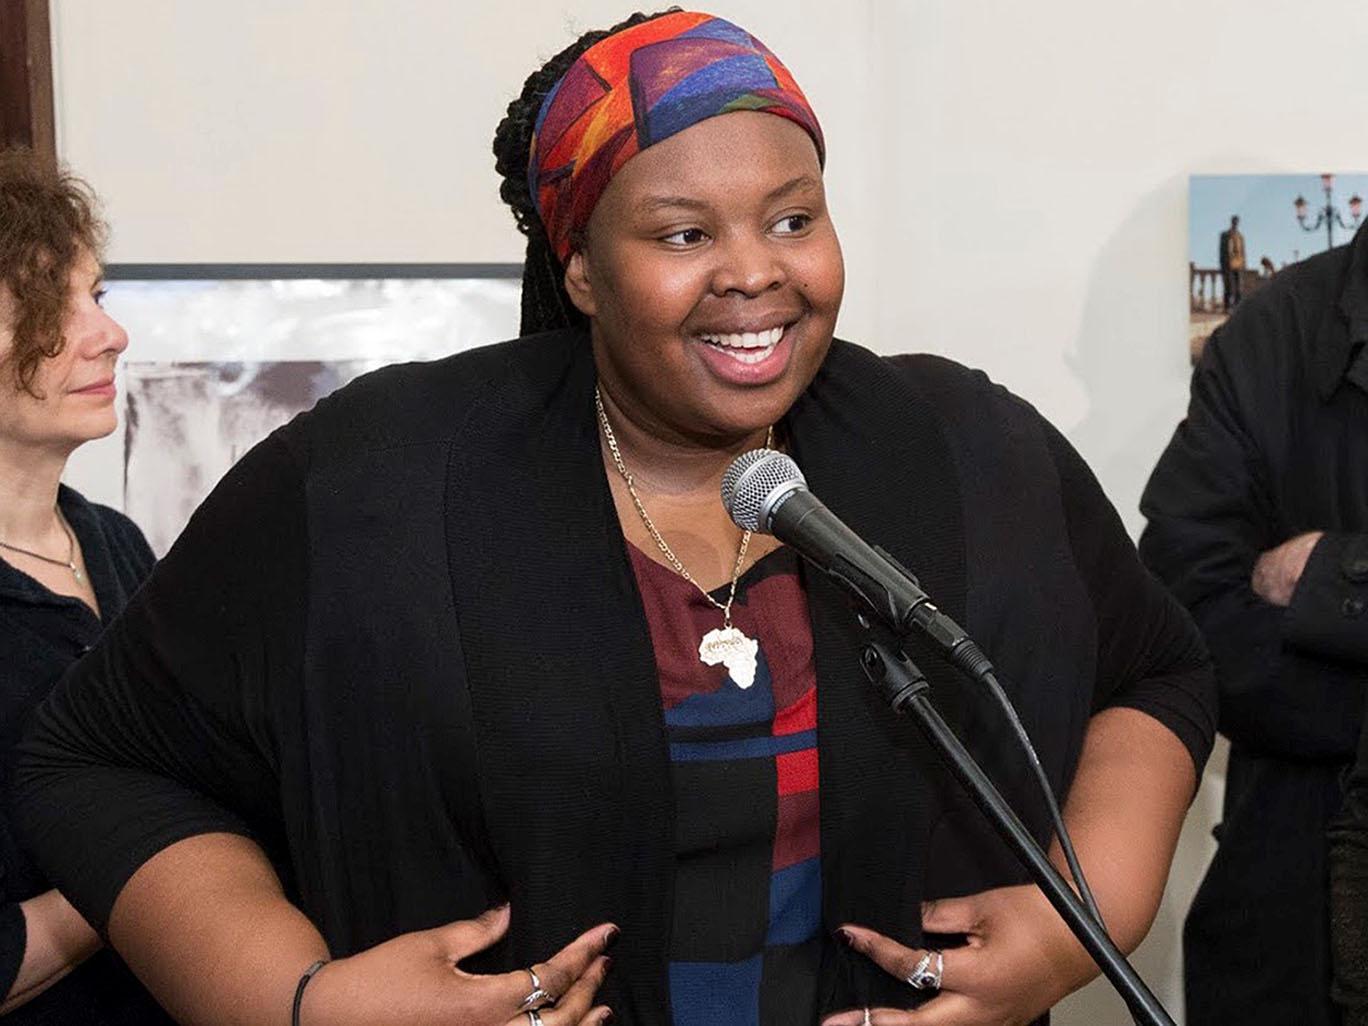 Khadija Saye was ‘very gentle, very kind and friendly’, according to a statement read on behalf of her father